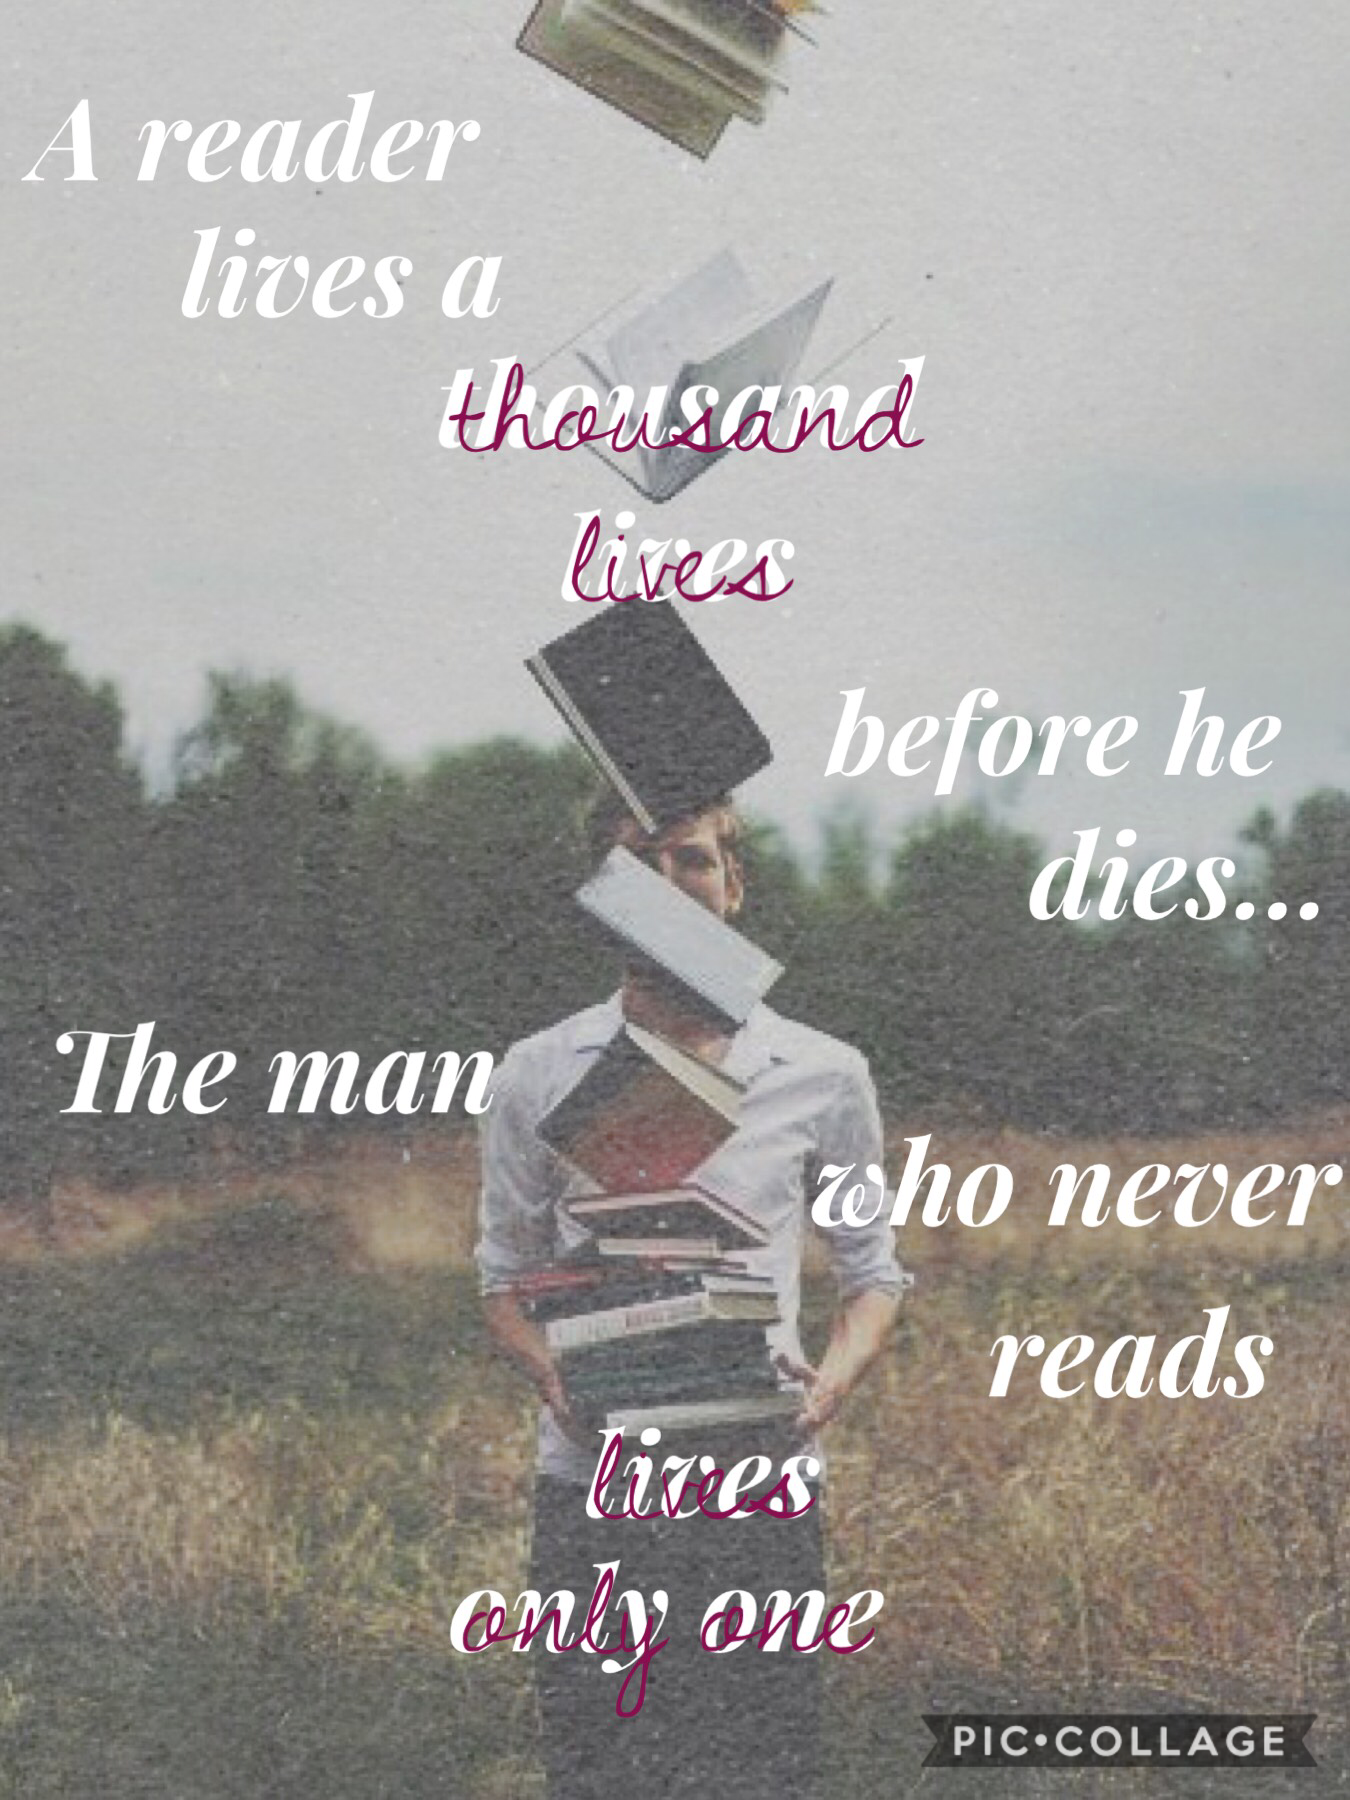 A reader lives a thousand lives before he dies. The man who never reads live only one.